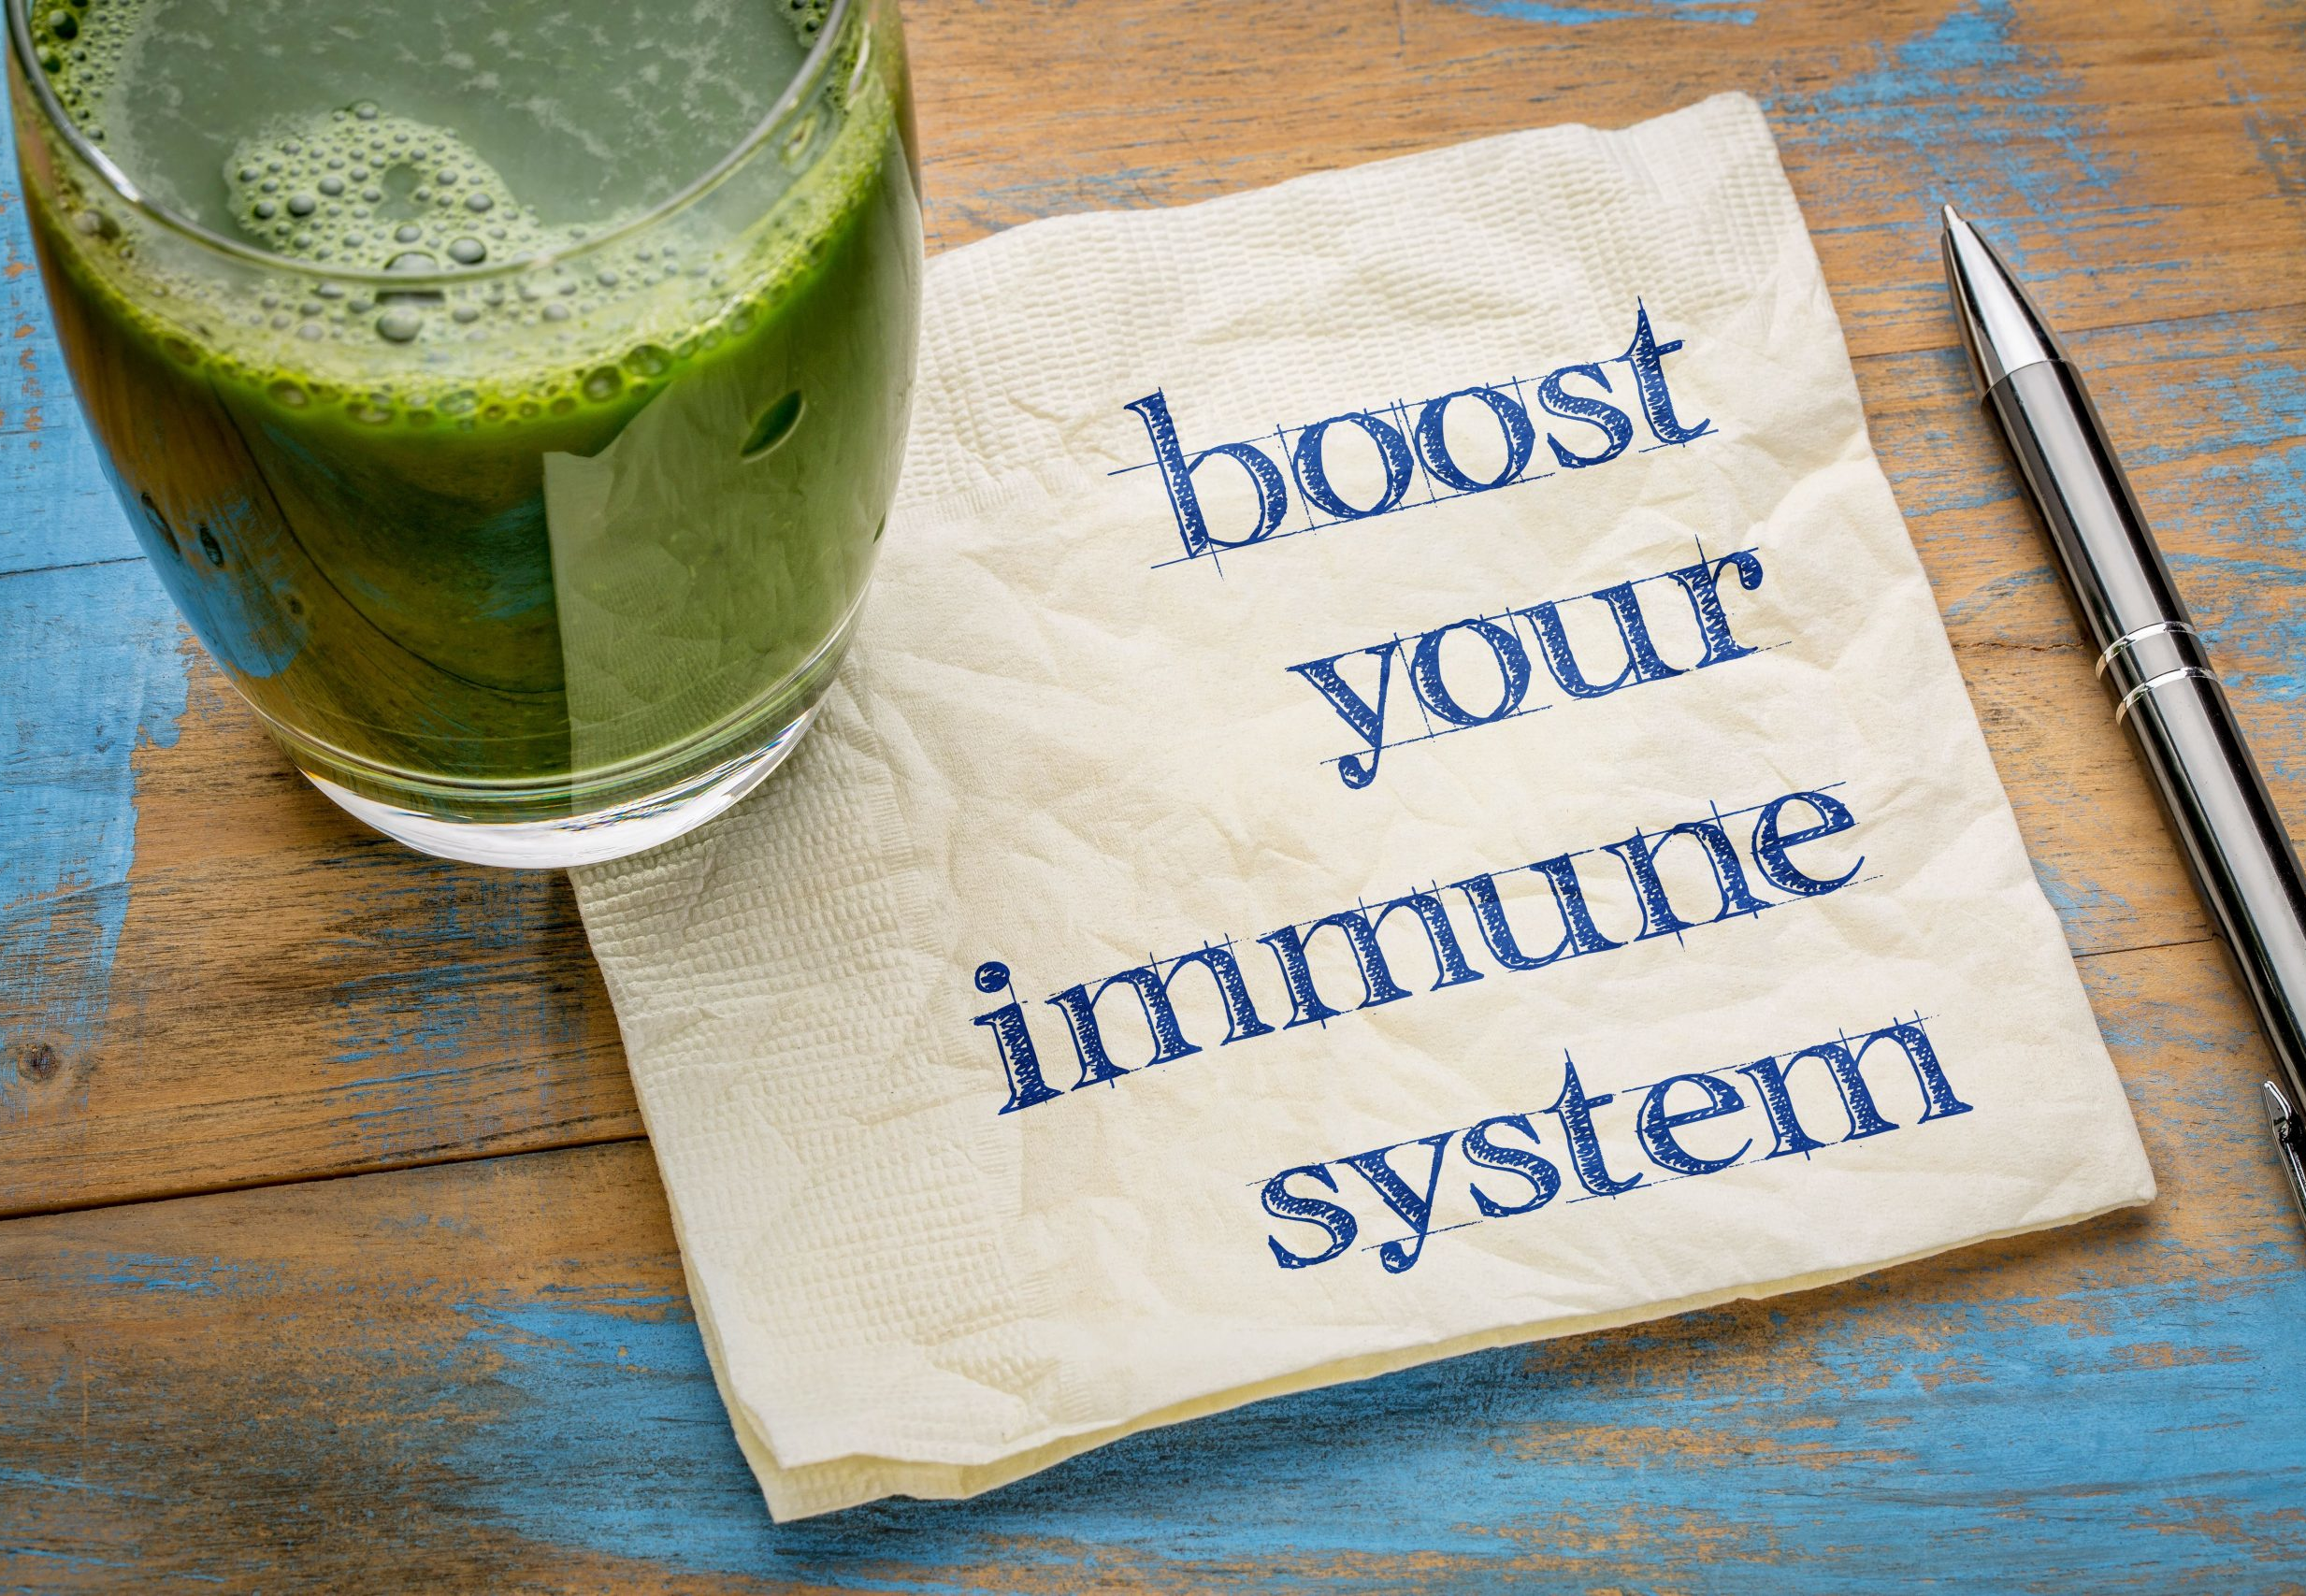 A glass of green juice or tea on top of a napkin that says "boost your immune system"